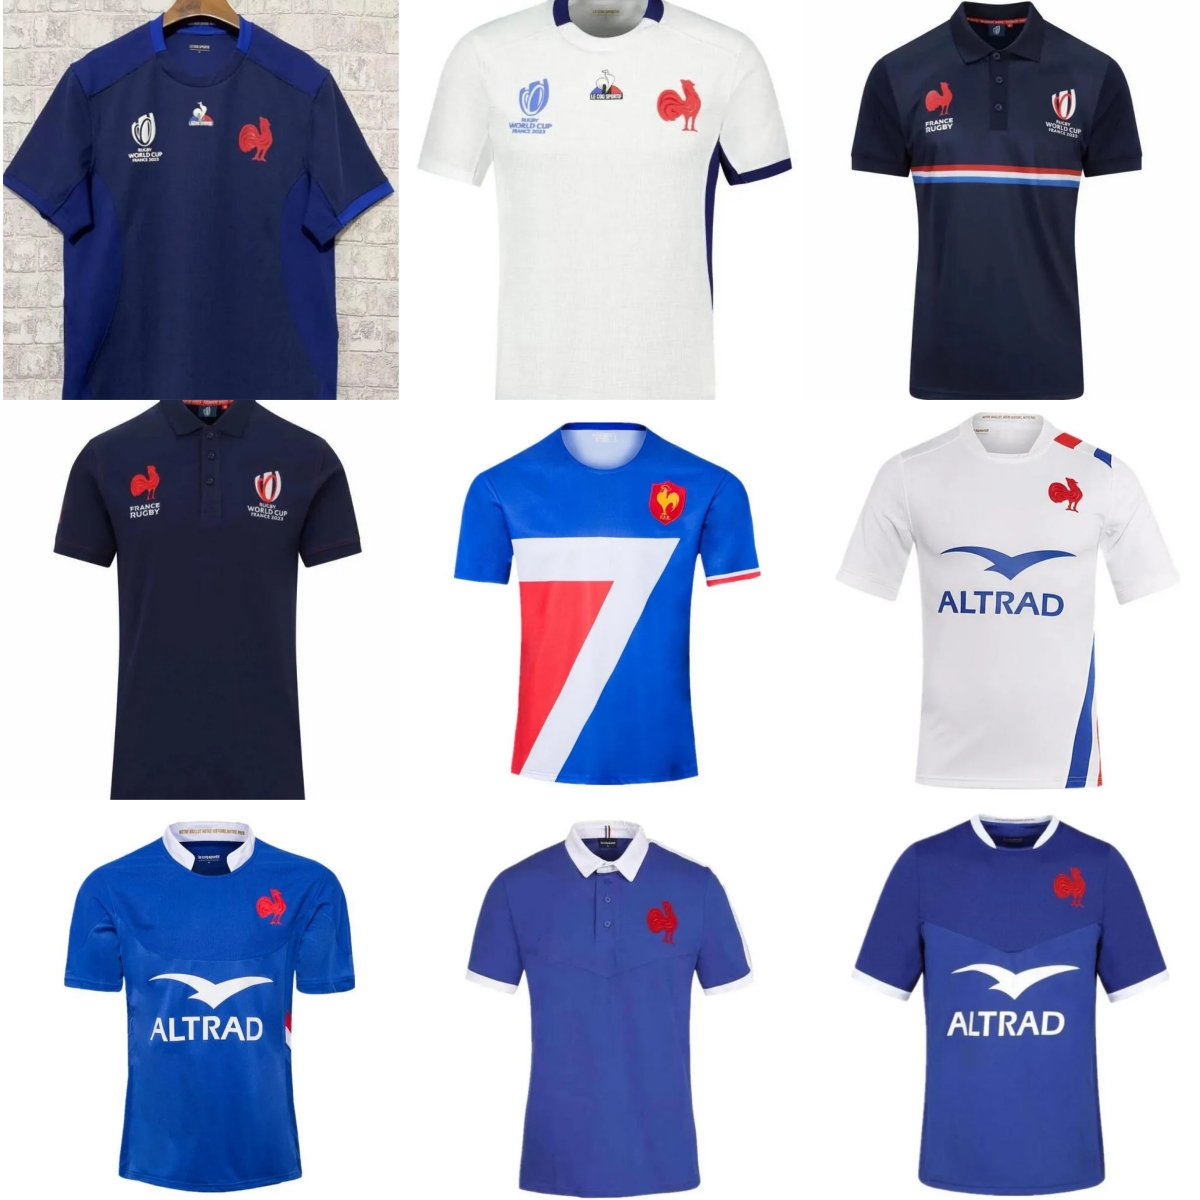 style 21 22 23 24 France Super Rugby Jerseys 2023 2024 Maillot de Foot BOLN shirt size S-5XL Top Quality